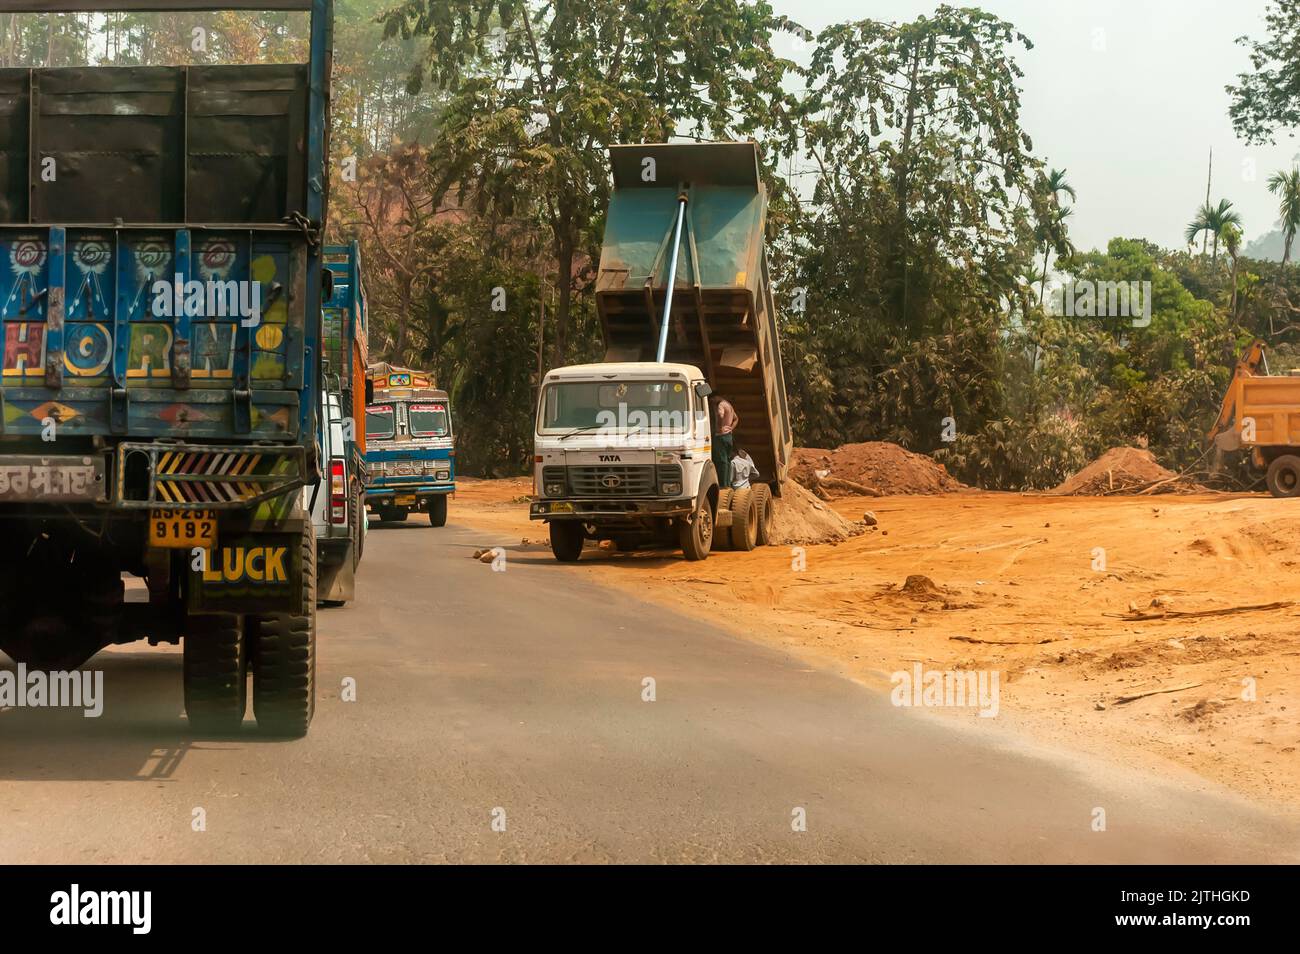 A dumper truck blocking traffic on an Indian highway. Stock Photo